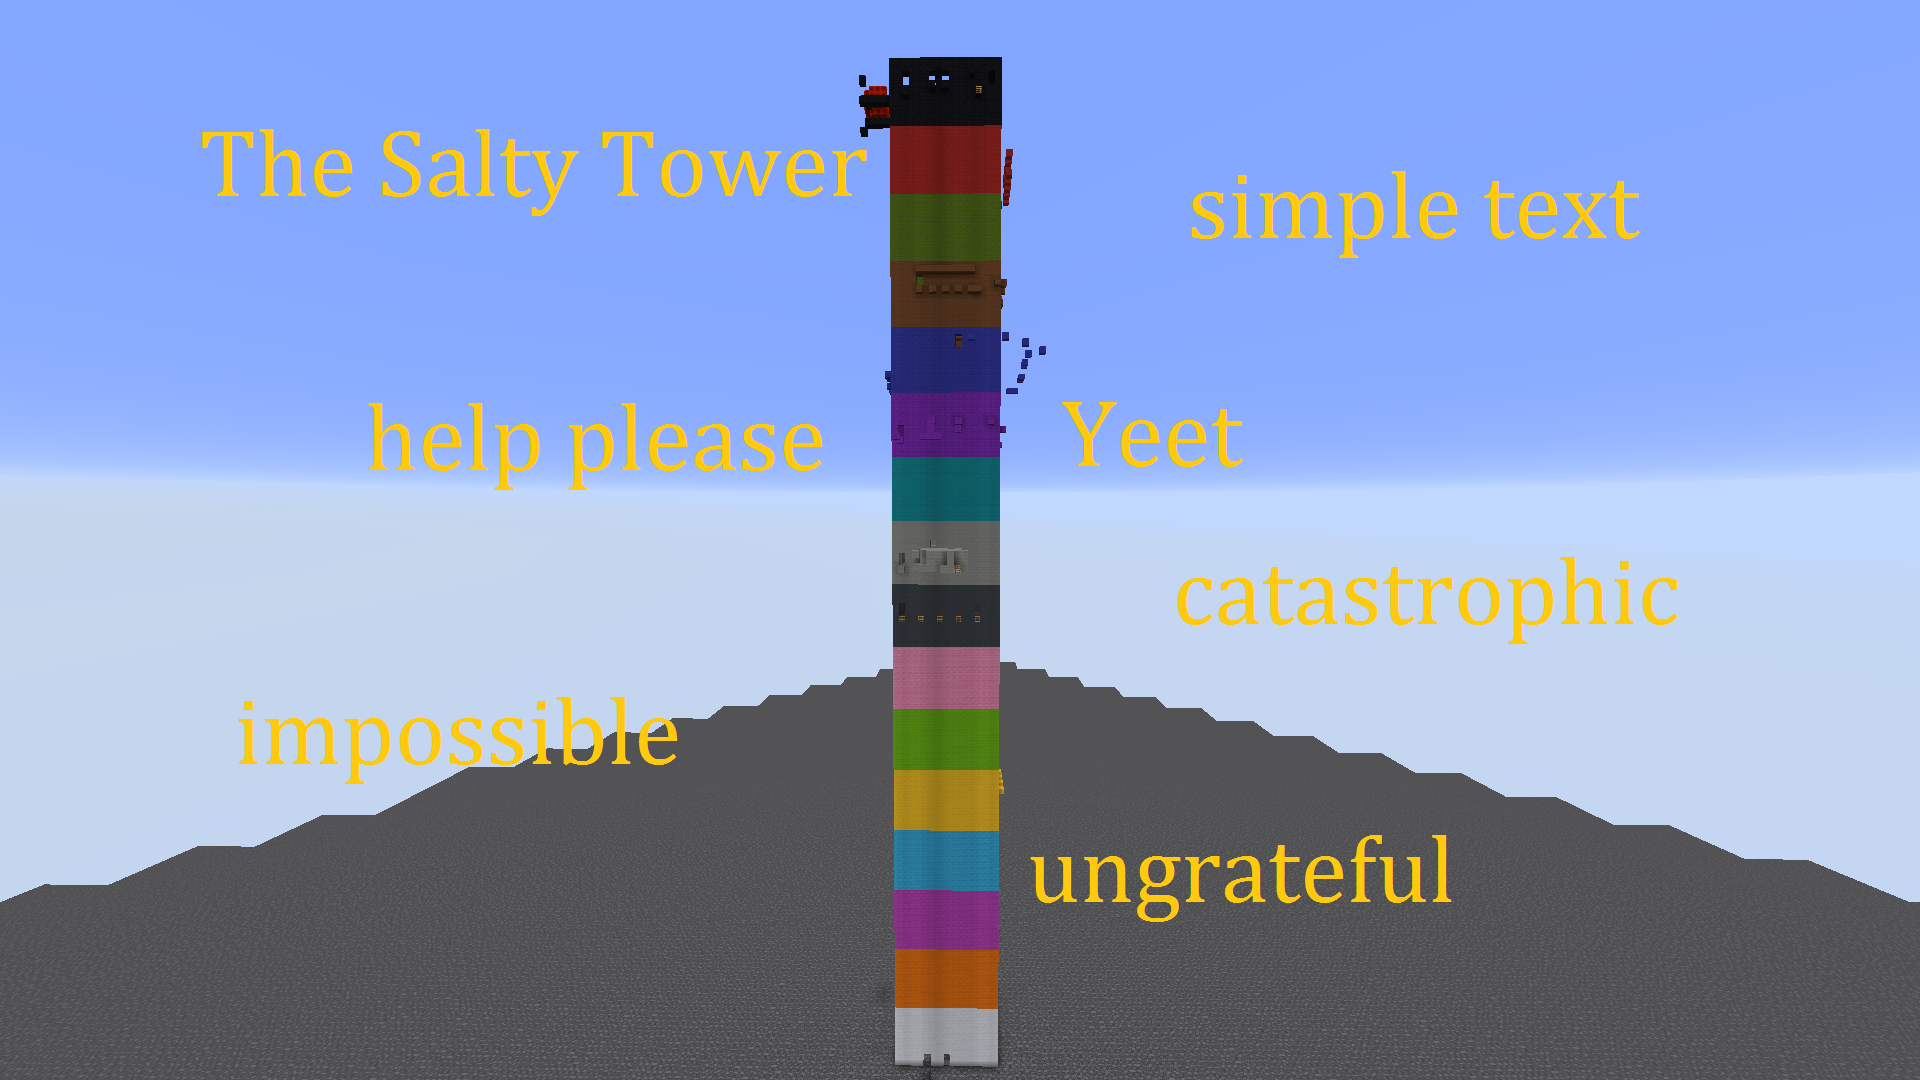 Télécharger The Salty Tower! pour Minecraft 1.14.3